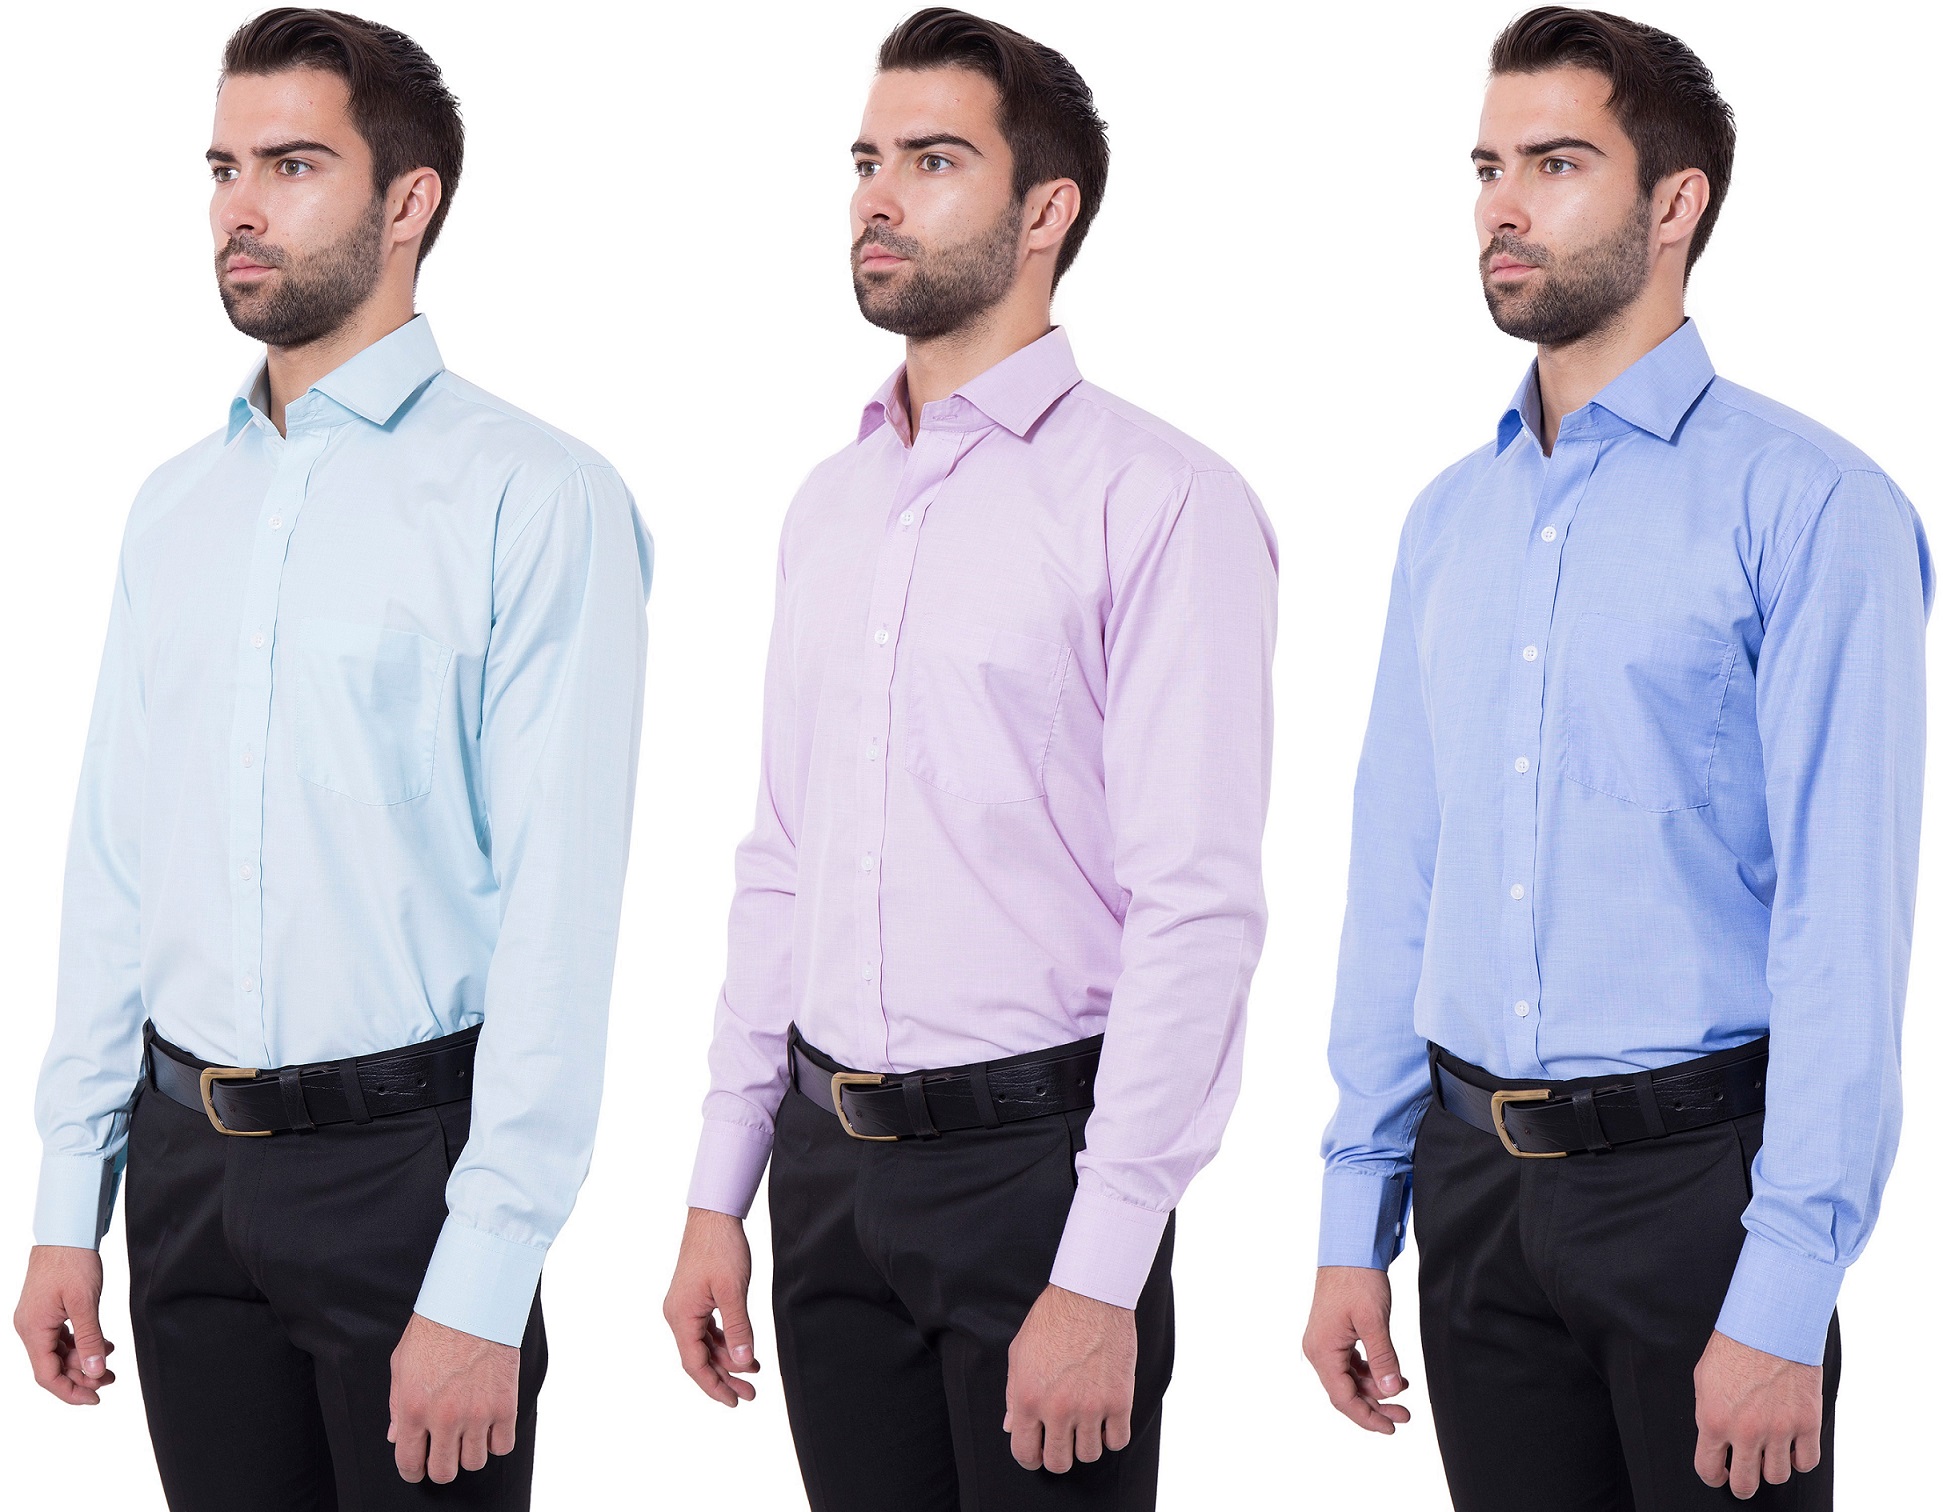 Buy Formal Shirt Combo Pack of 3 for Men Online @ ₹1599 from ShopClues